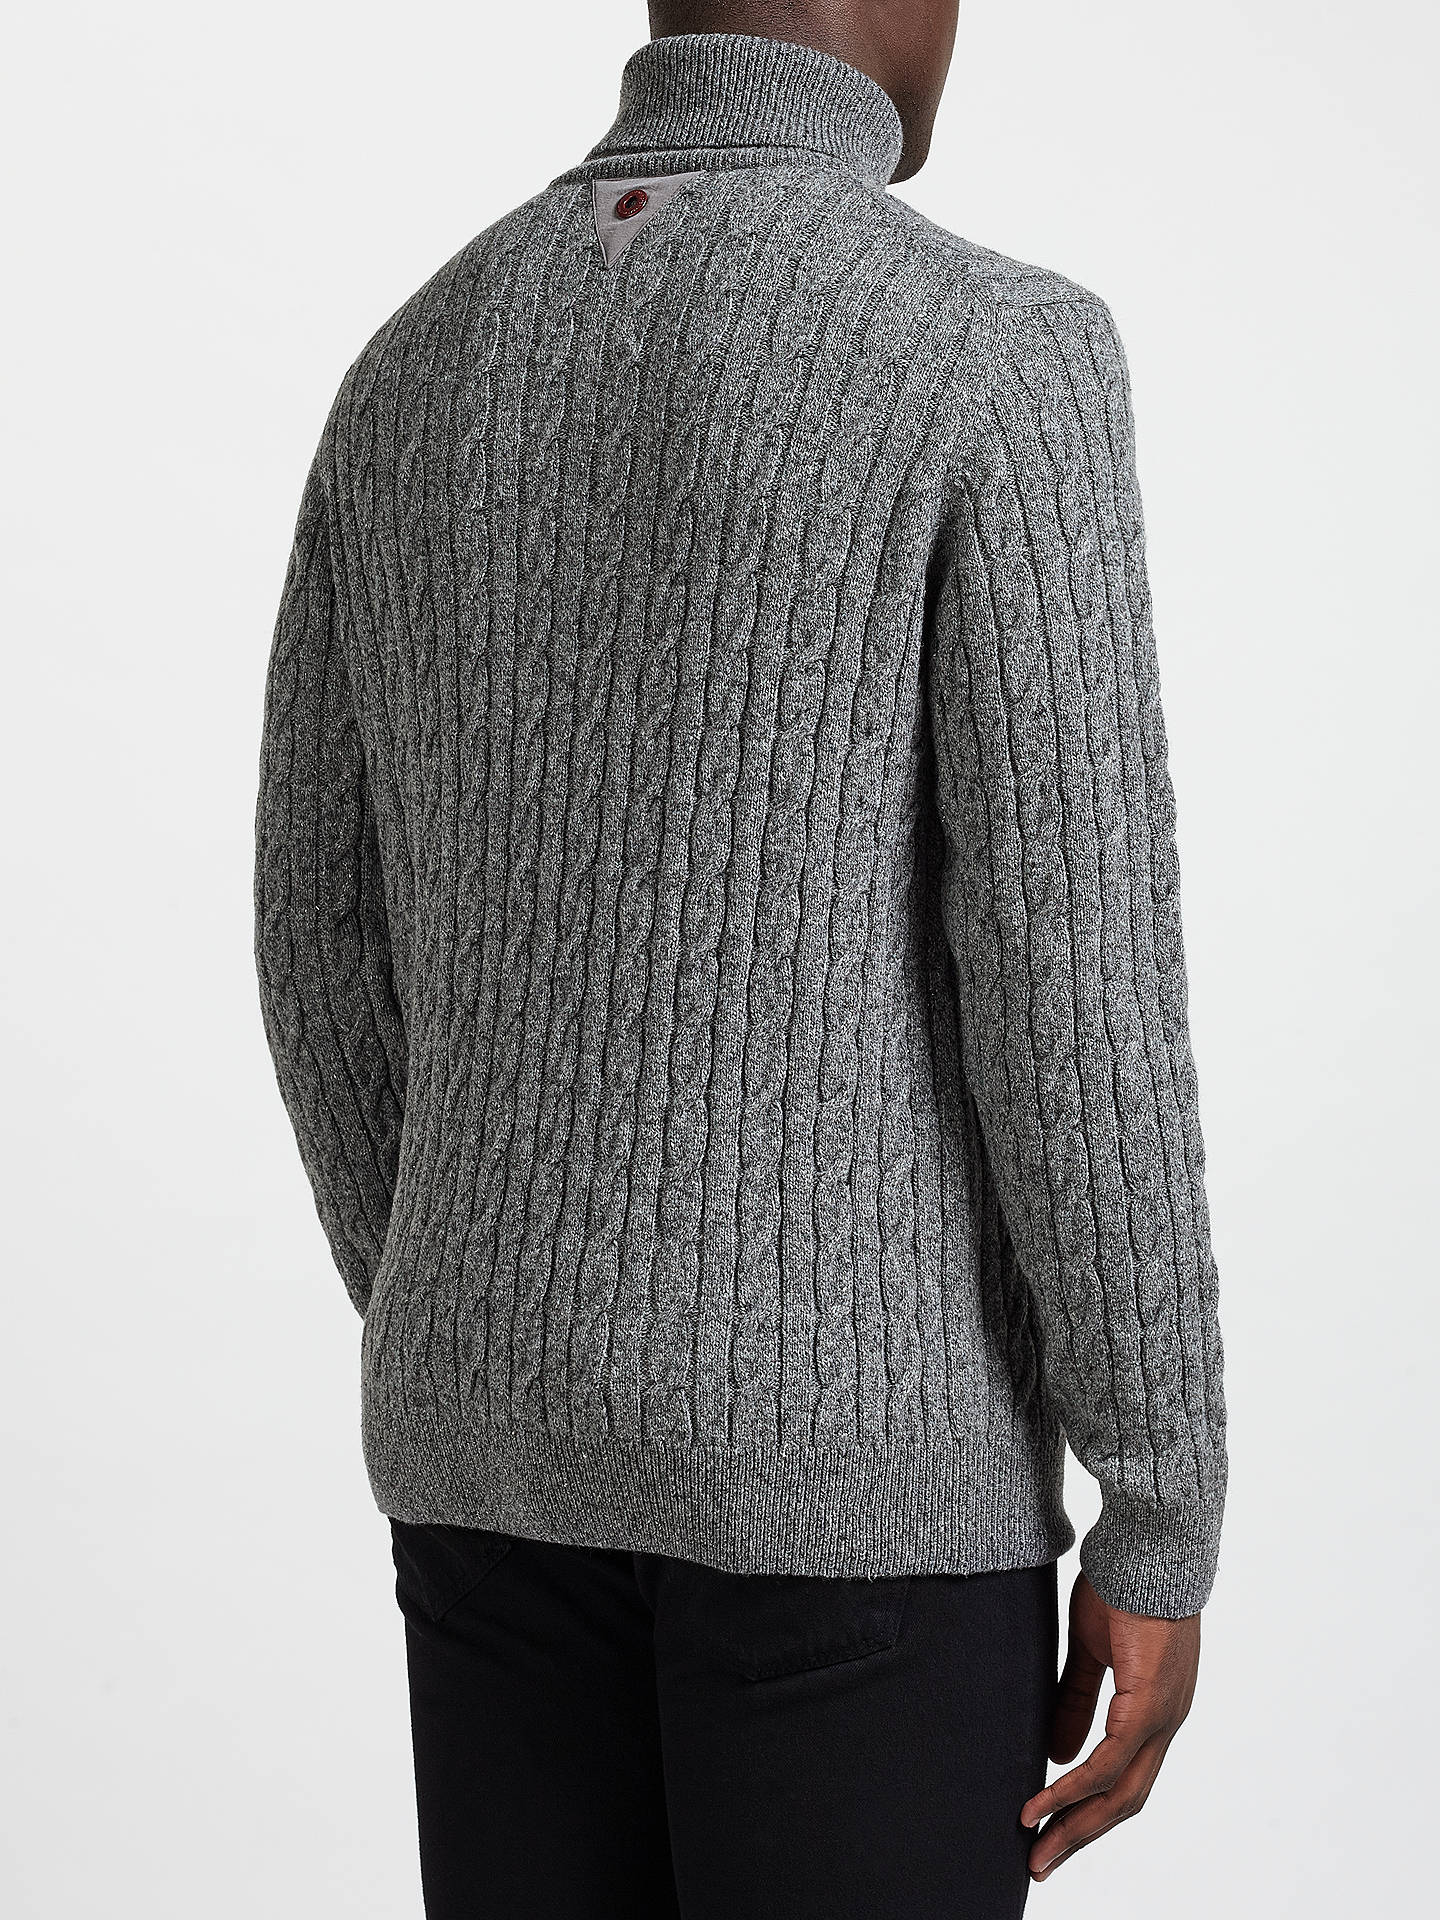 Barbour Greatcoat Upstart Roll Neck Cable Knit Jumper, Grey at John ...